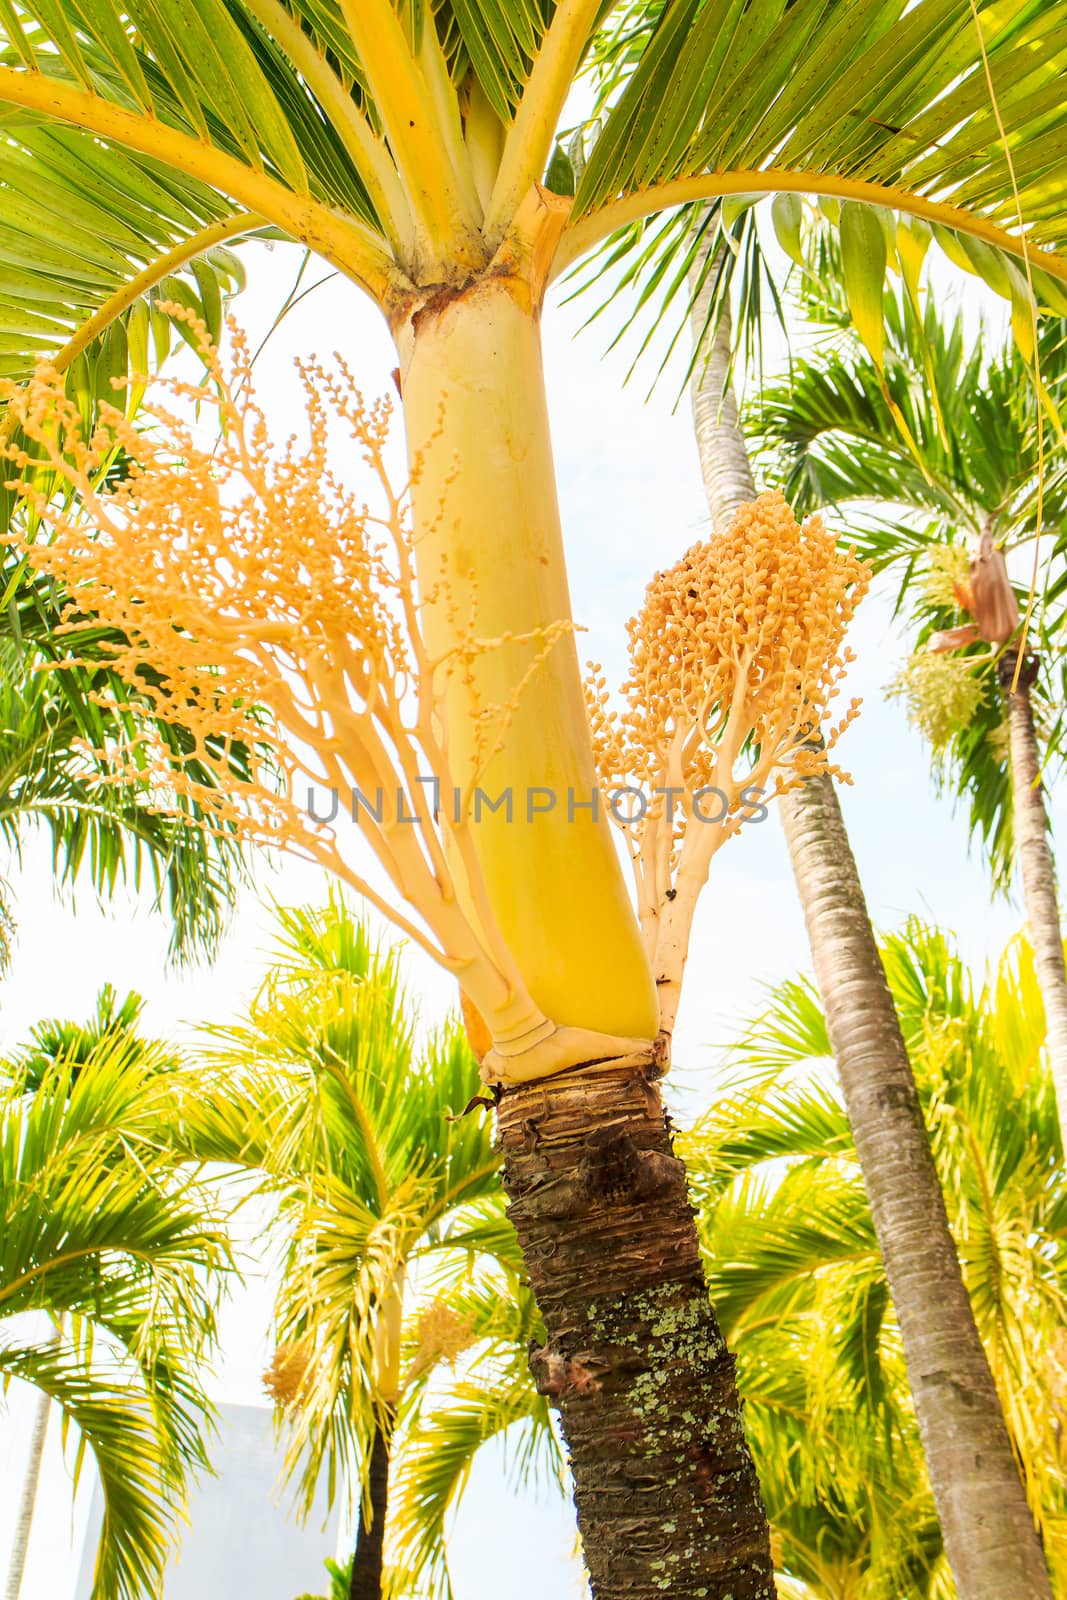 This tree is also called Manila Palm or in Latin Adonidia Merrillii 